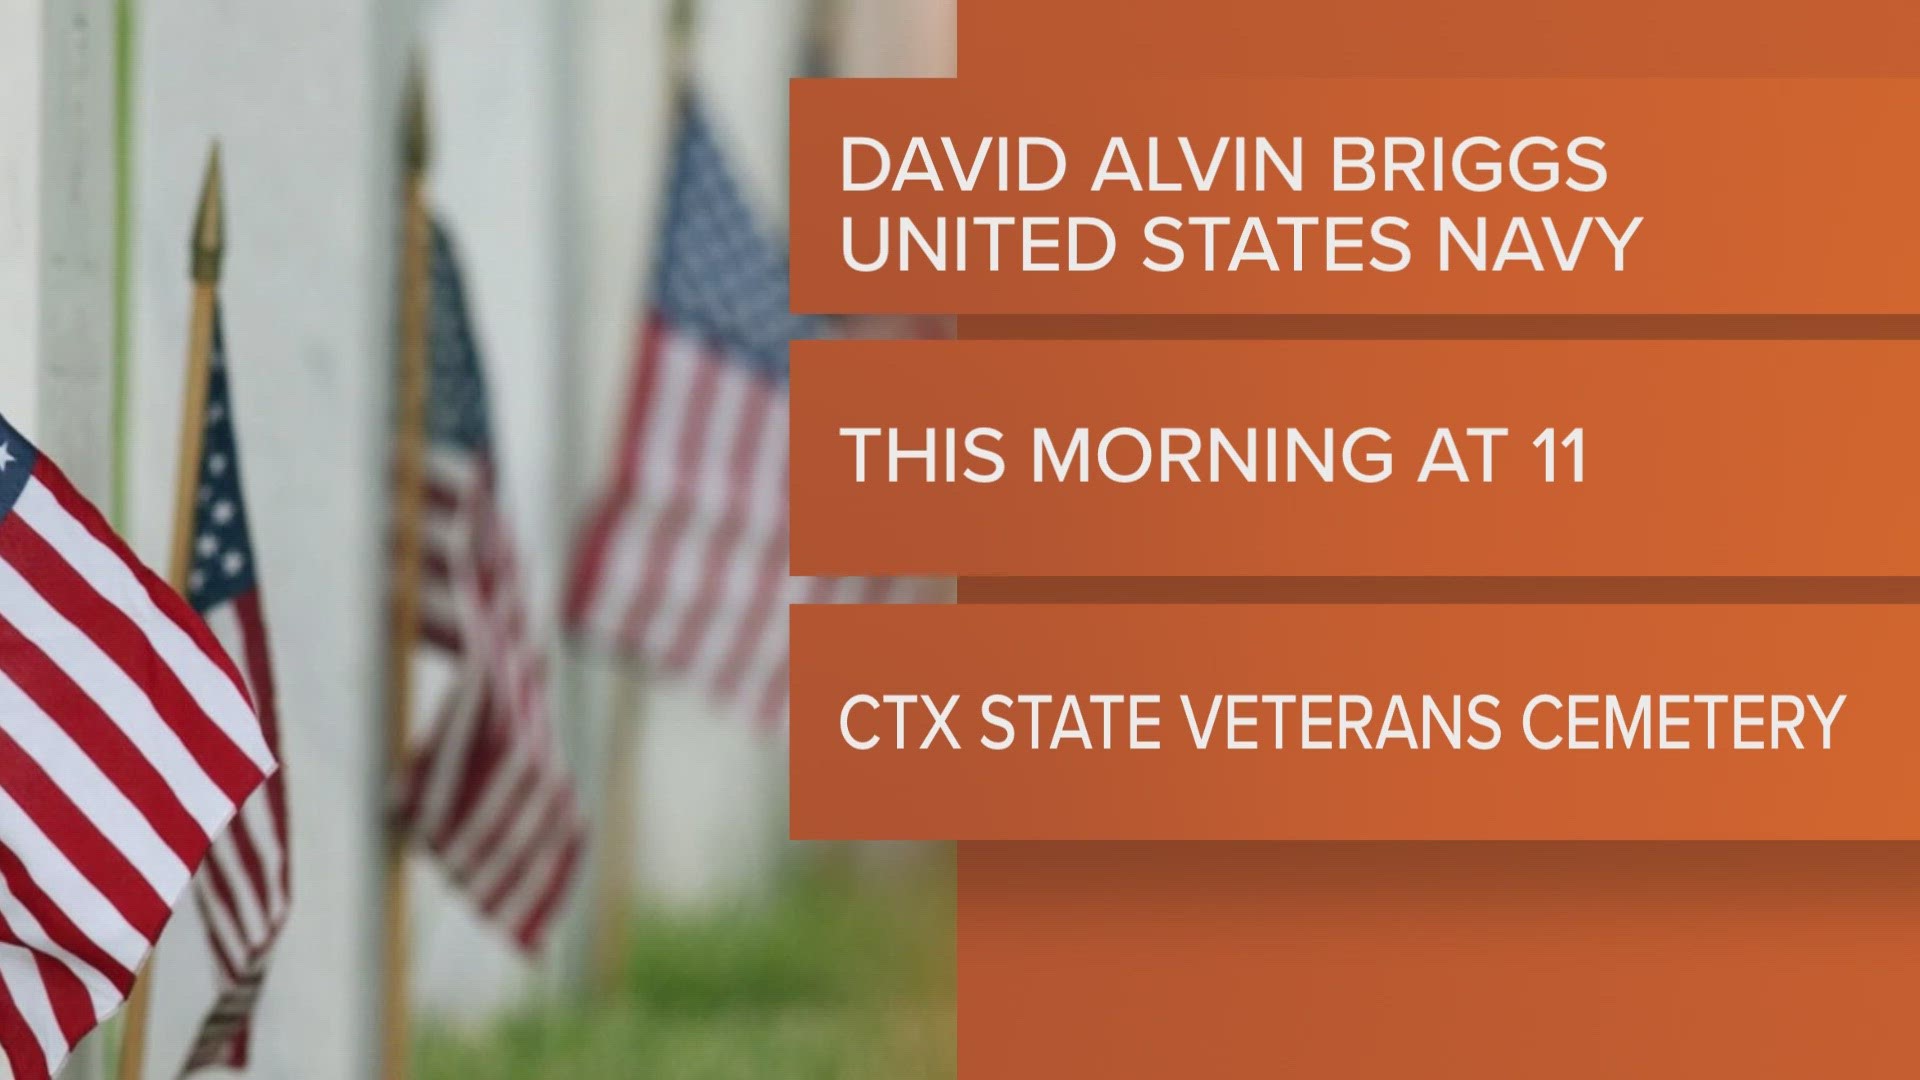 US Navy Veteran Seaman Apprentice David Alvin Briggs is not expected to have any next of kin attend the service.